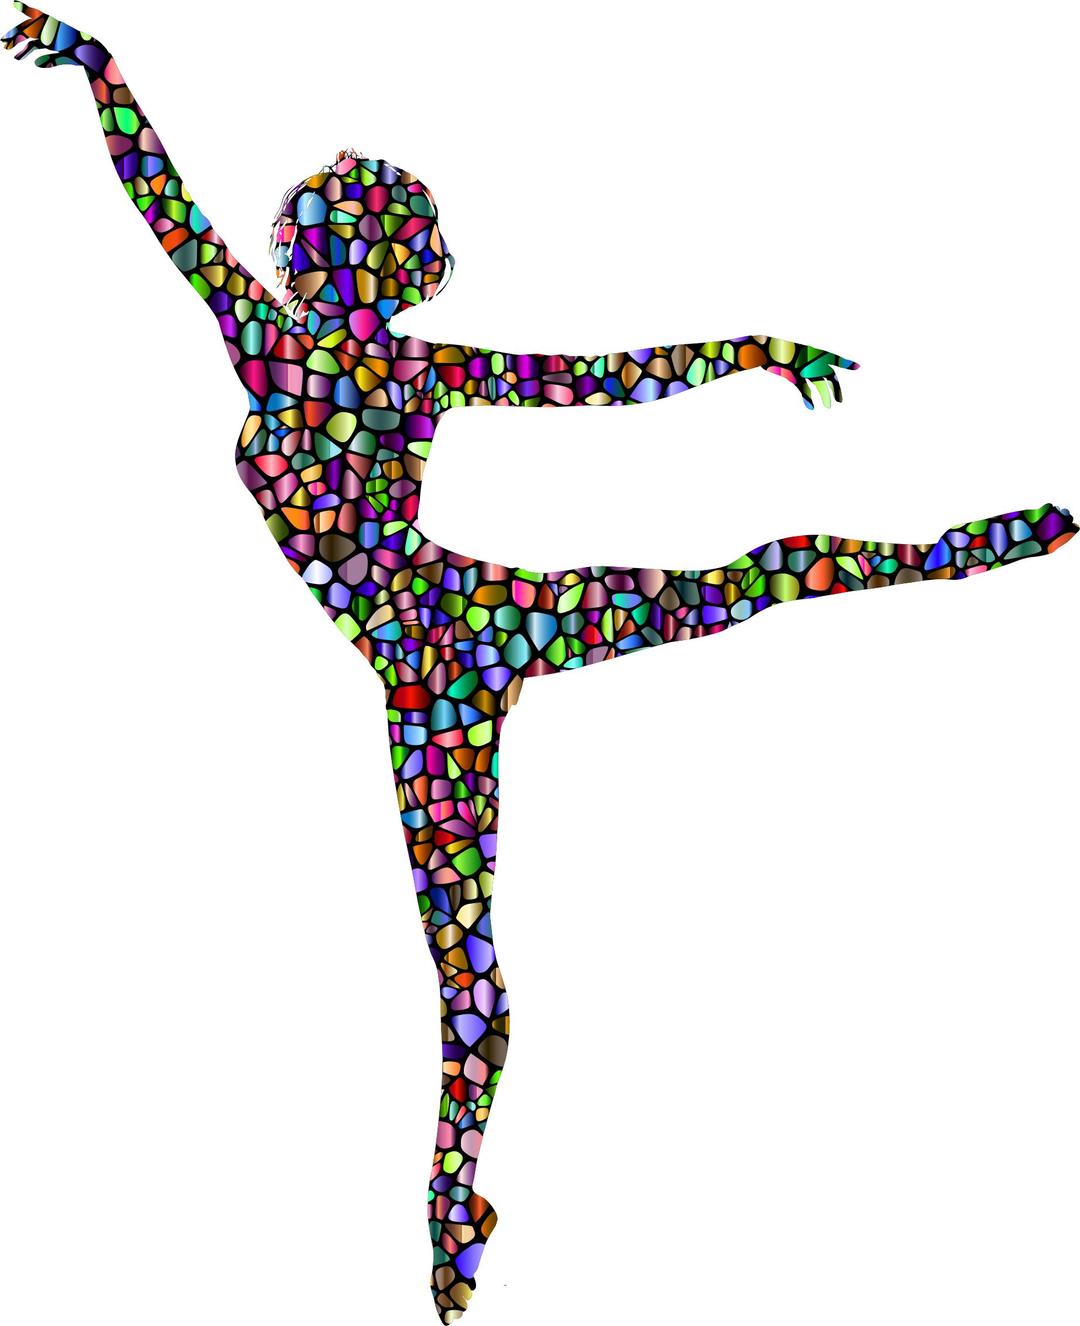 Polychromatic Tiled Lithe Dancing Woman Silhouette png transparent